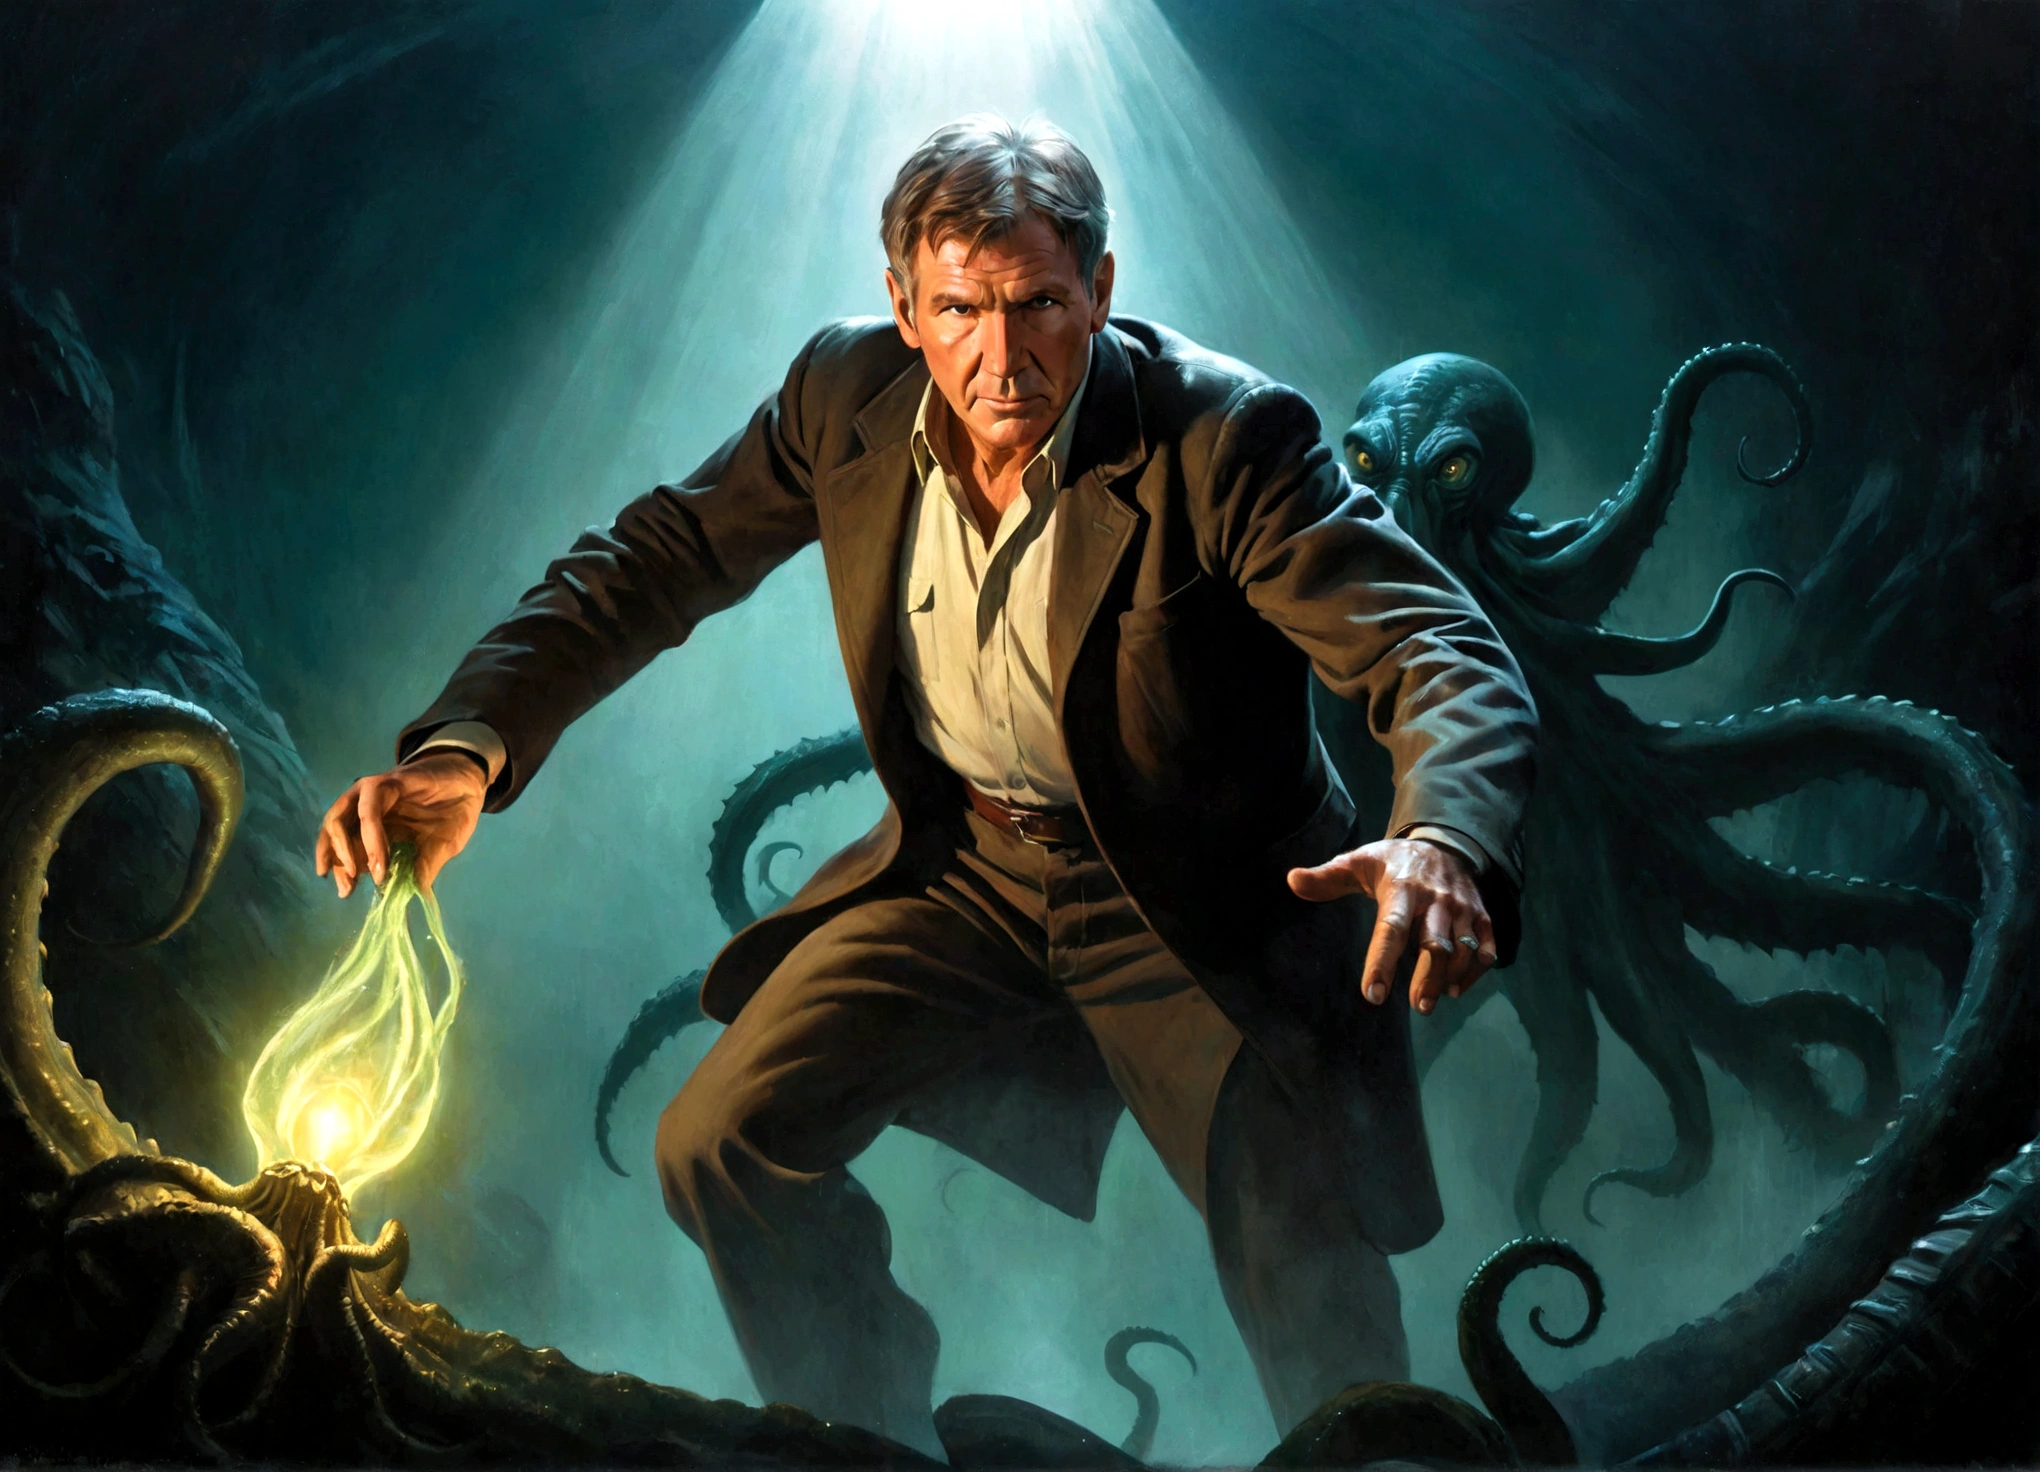 50s movie poster, Harrison Ford (age 30) adventurers gear dramatic pose, Cthulu and his dark shadow reaching for him